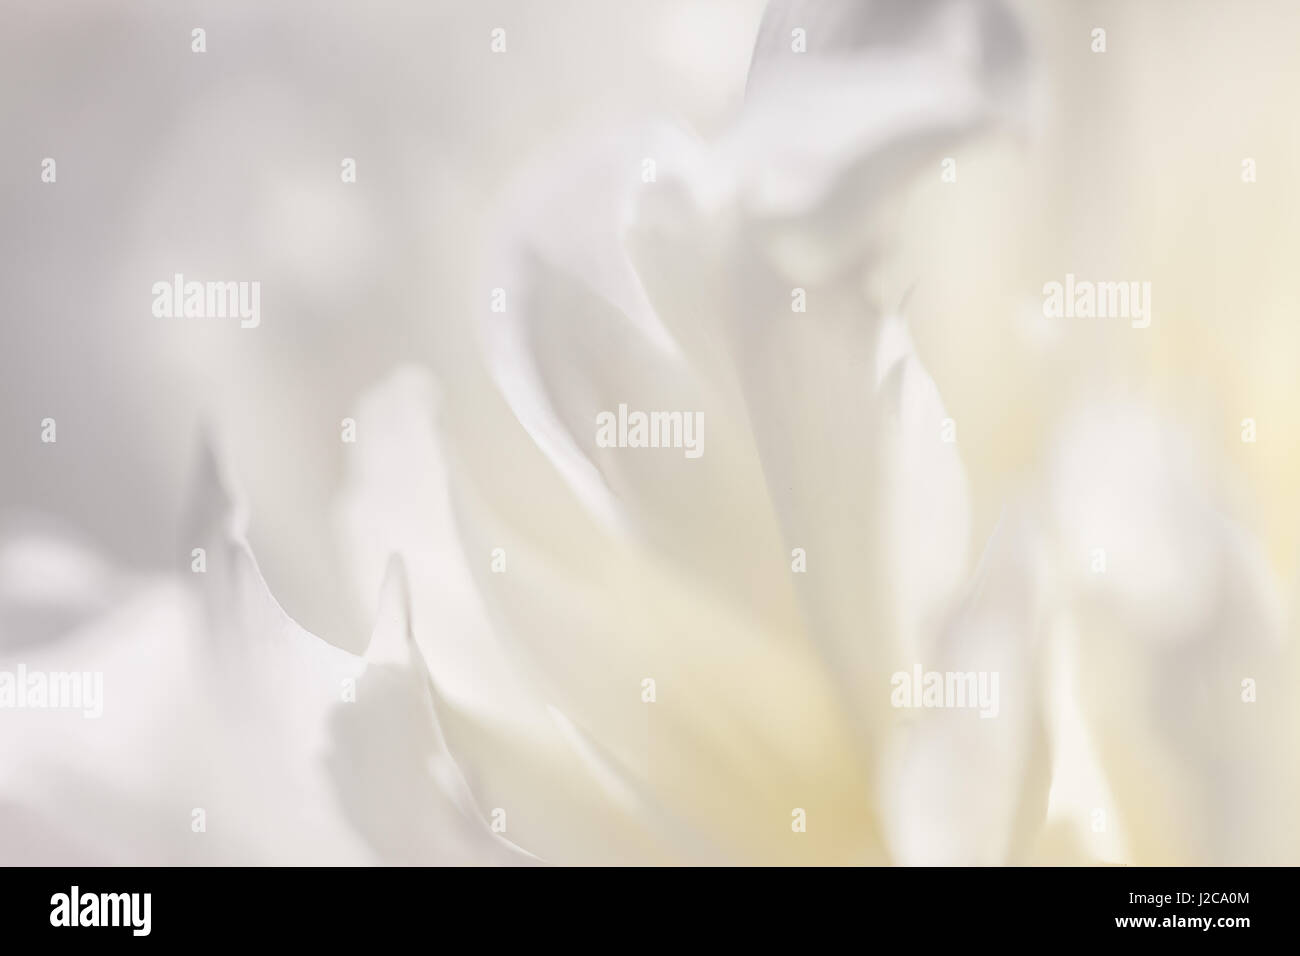 Close up of white flower petal, teal, soft dreamy image Stock Photo